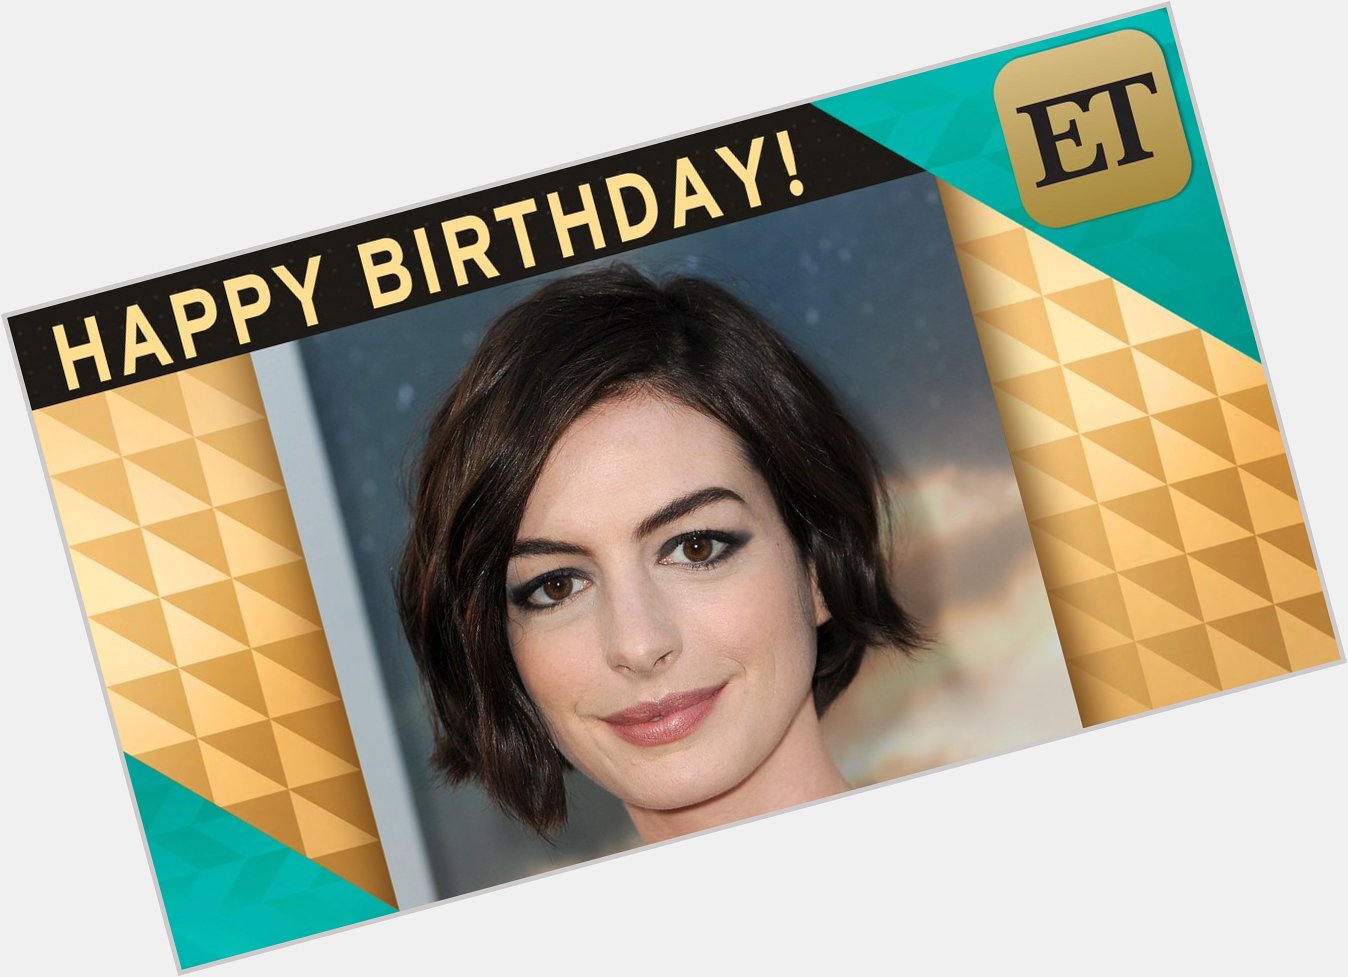 Happy birthday, Anne Hathaway! As stunning as ever. 